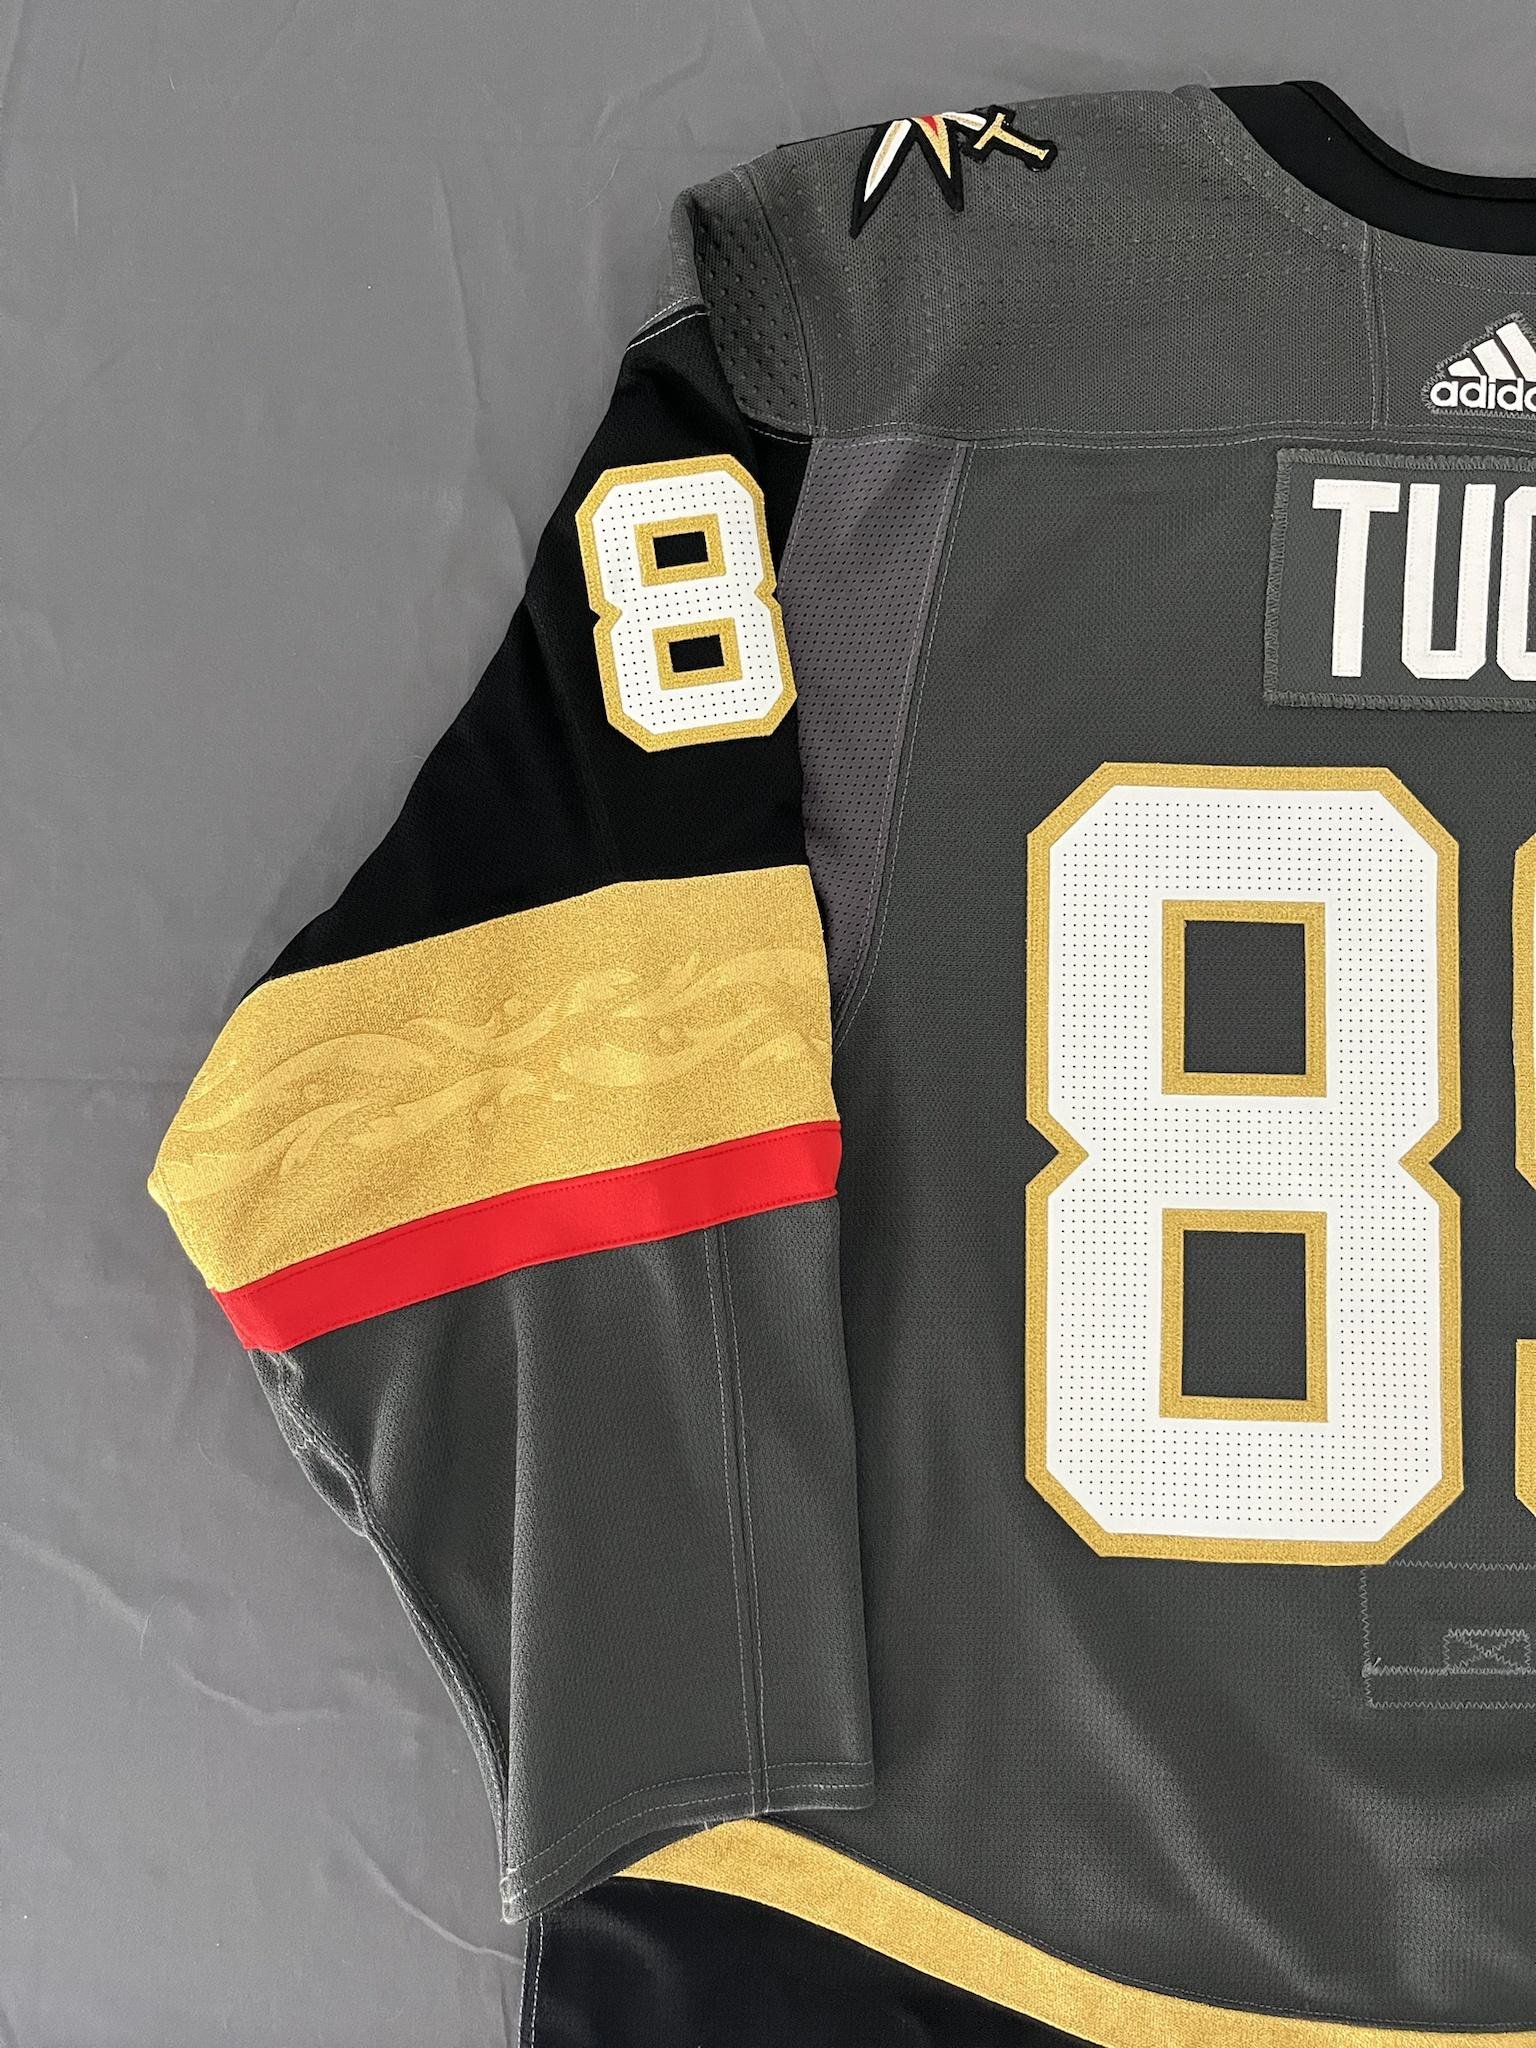 Vegas Golden Knights right wing Alex Tuch (89) wears a jersey commemorating Chinese  New Year du …